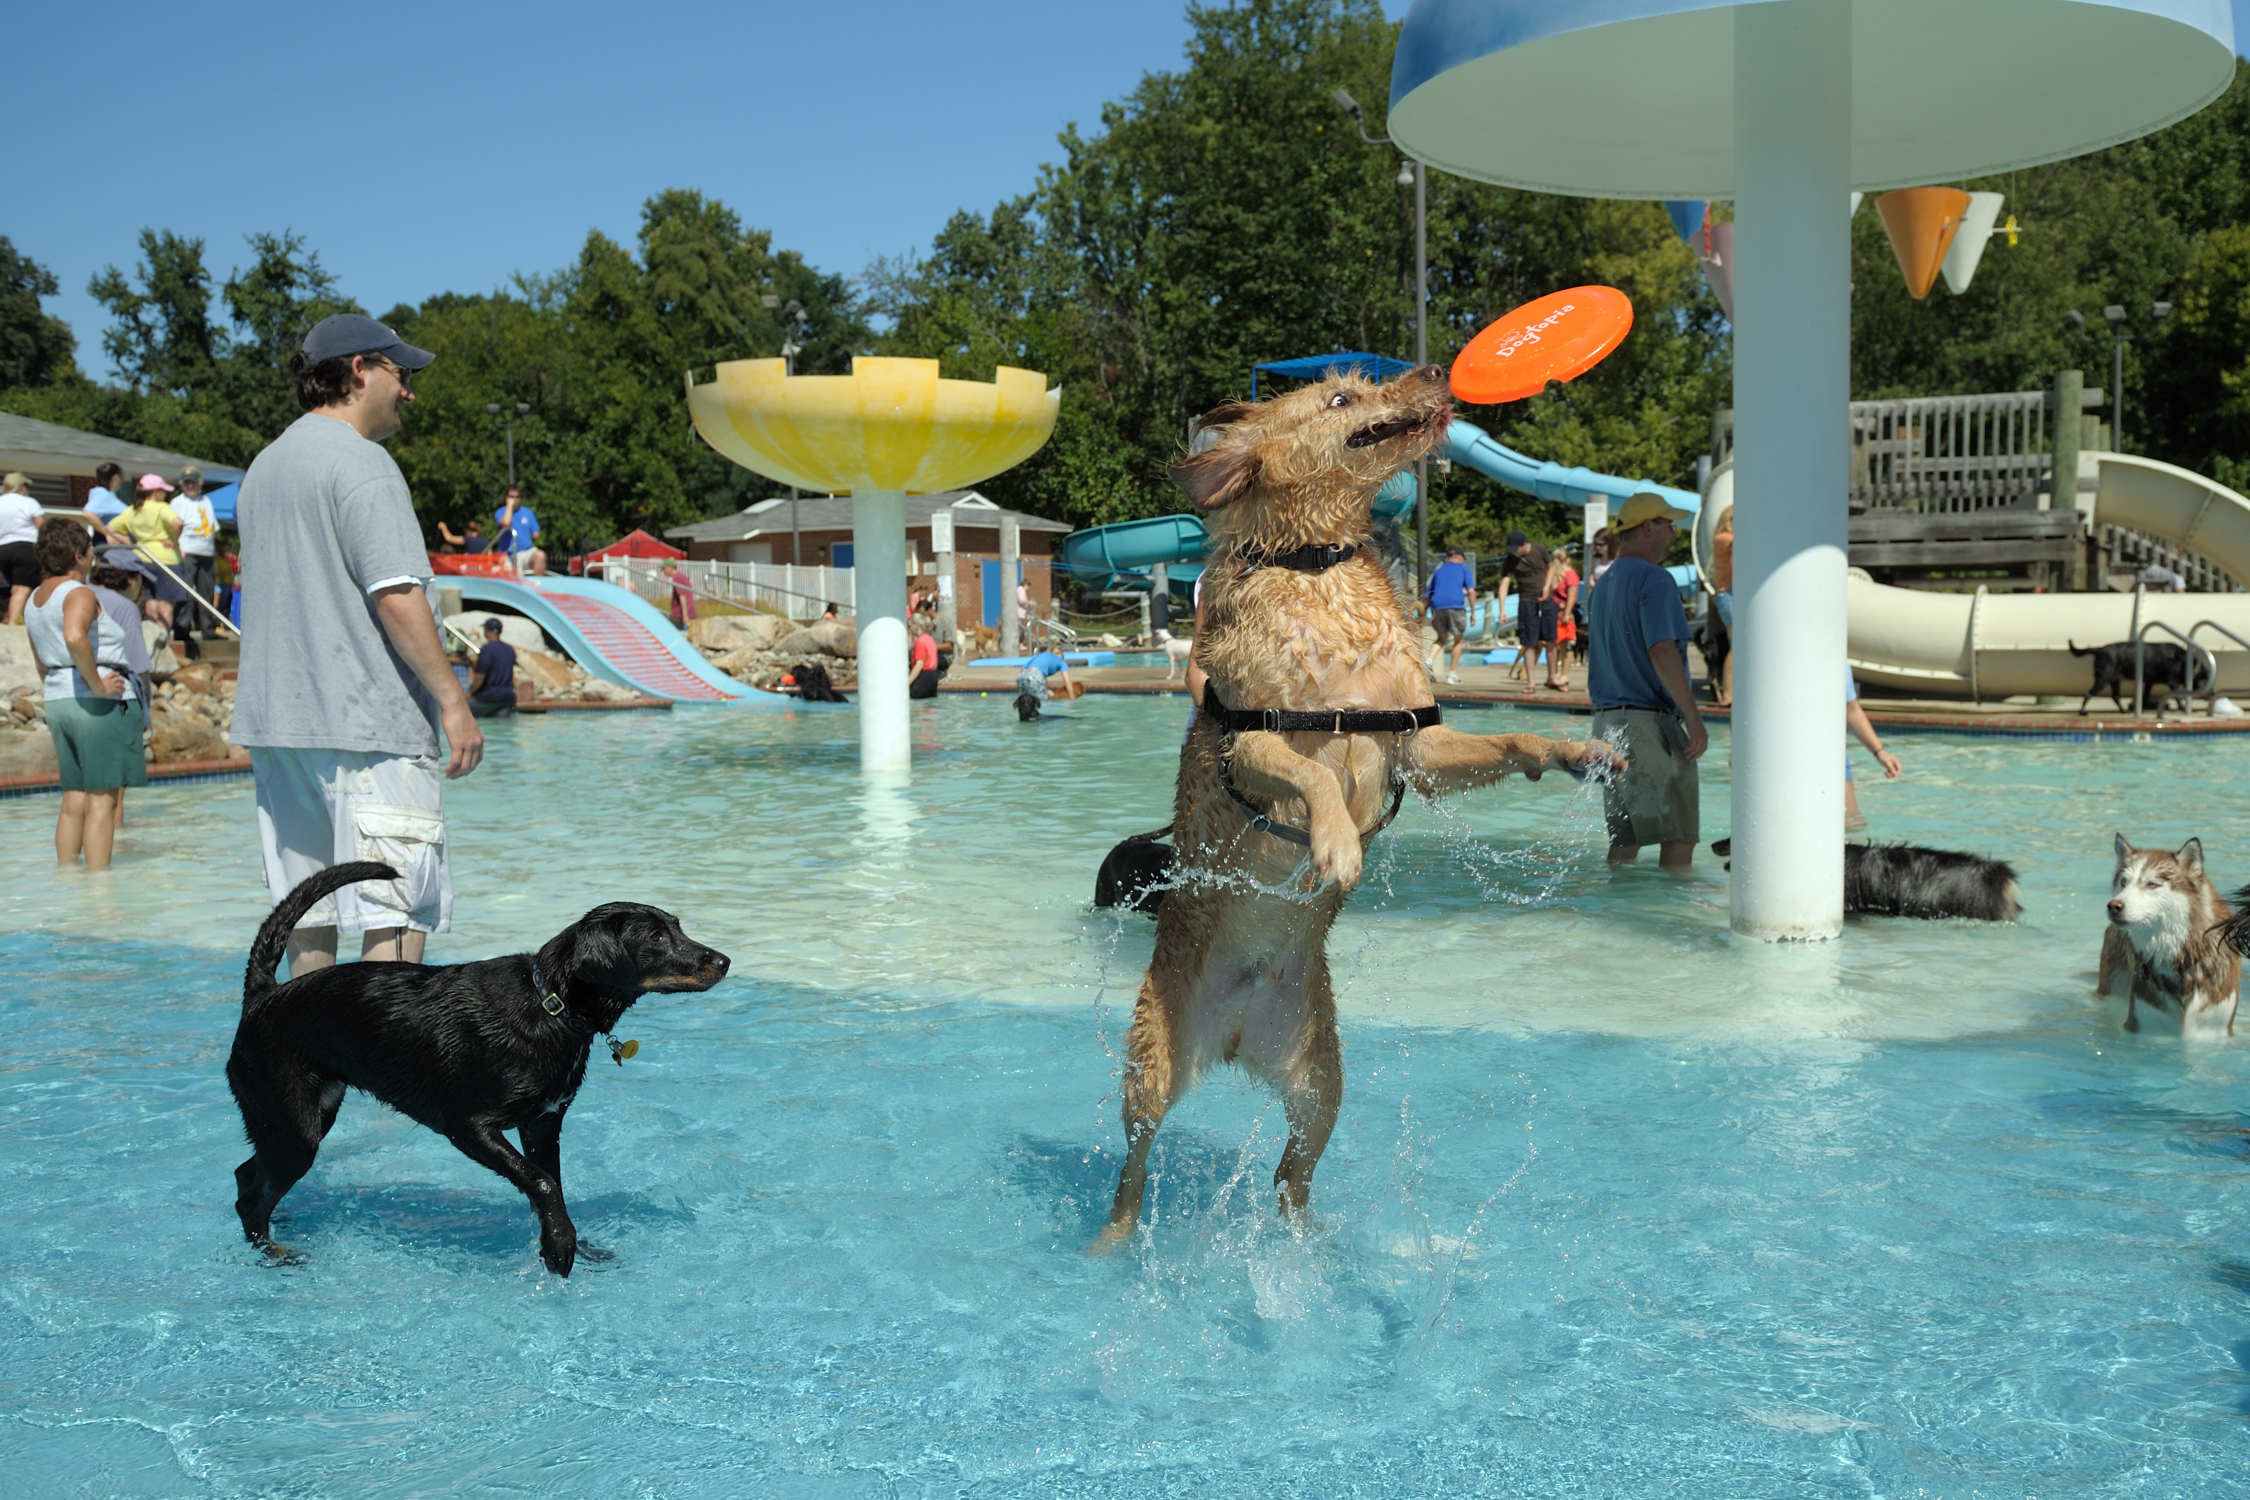 Party poopers? No pooch pool soiree this year in MoCo